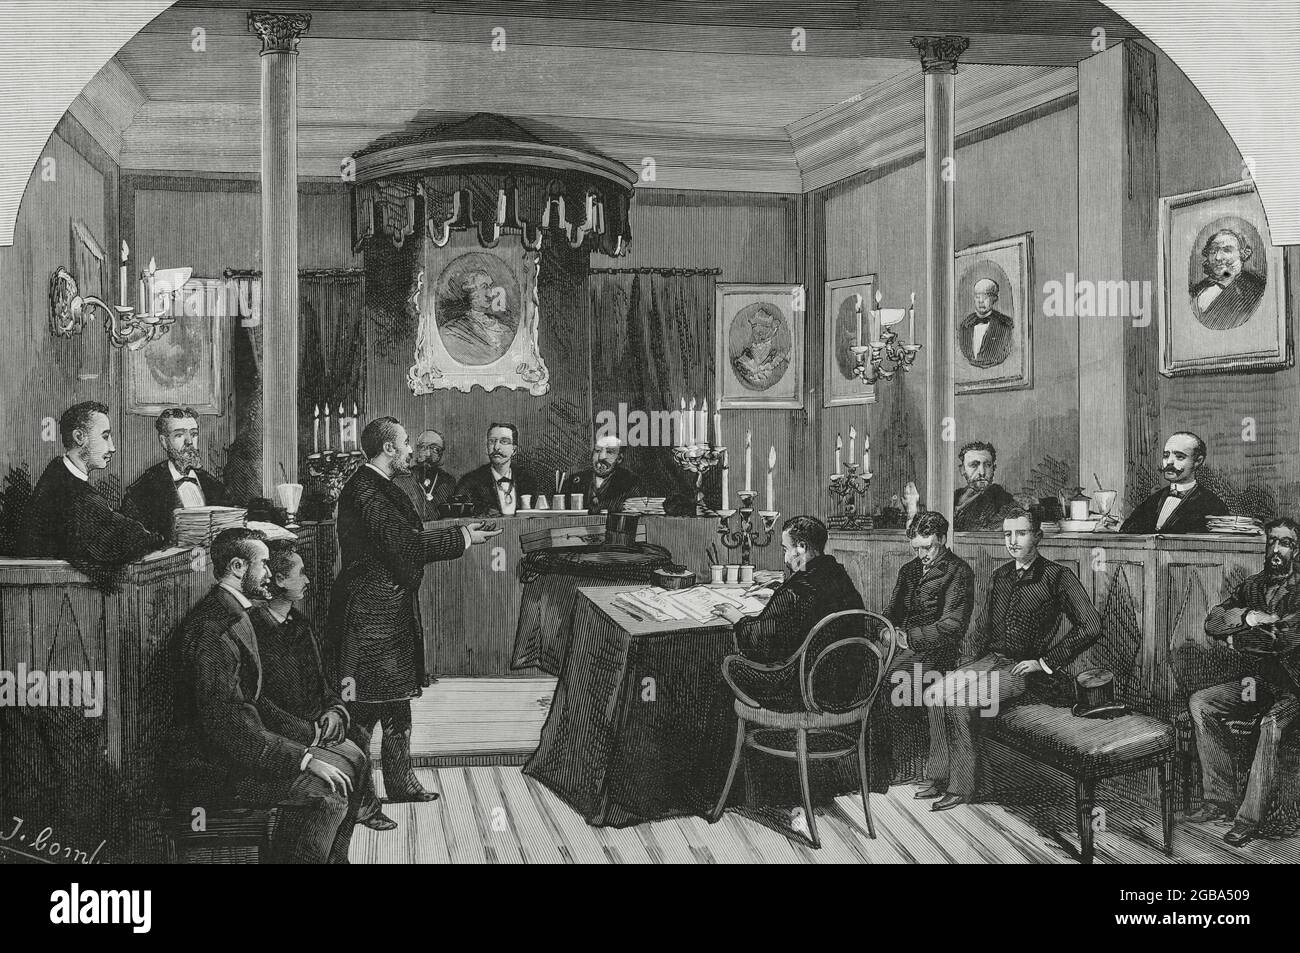 Spain, Madrid. The new criminal prosecution. Rehearsal of the oral and public trial at the Royal Academy of Jurisprudence, on the 15th and 16th of the current month. Drawing by Juan Comba. Engraving by Eugenio Vela. La Ilustración Española y Americana, December 30, 1882. Stock Photo